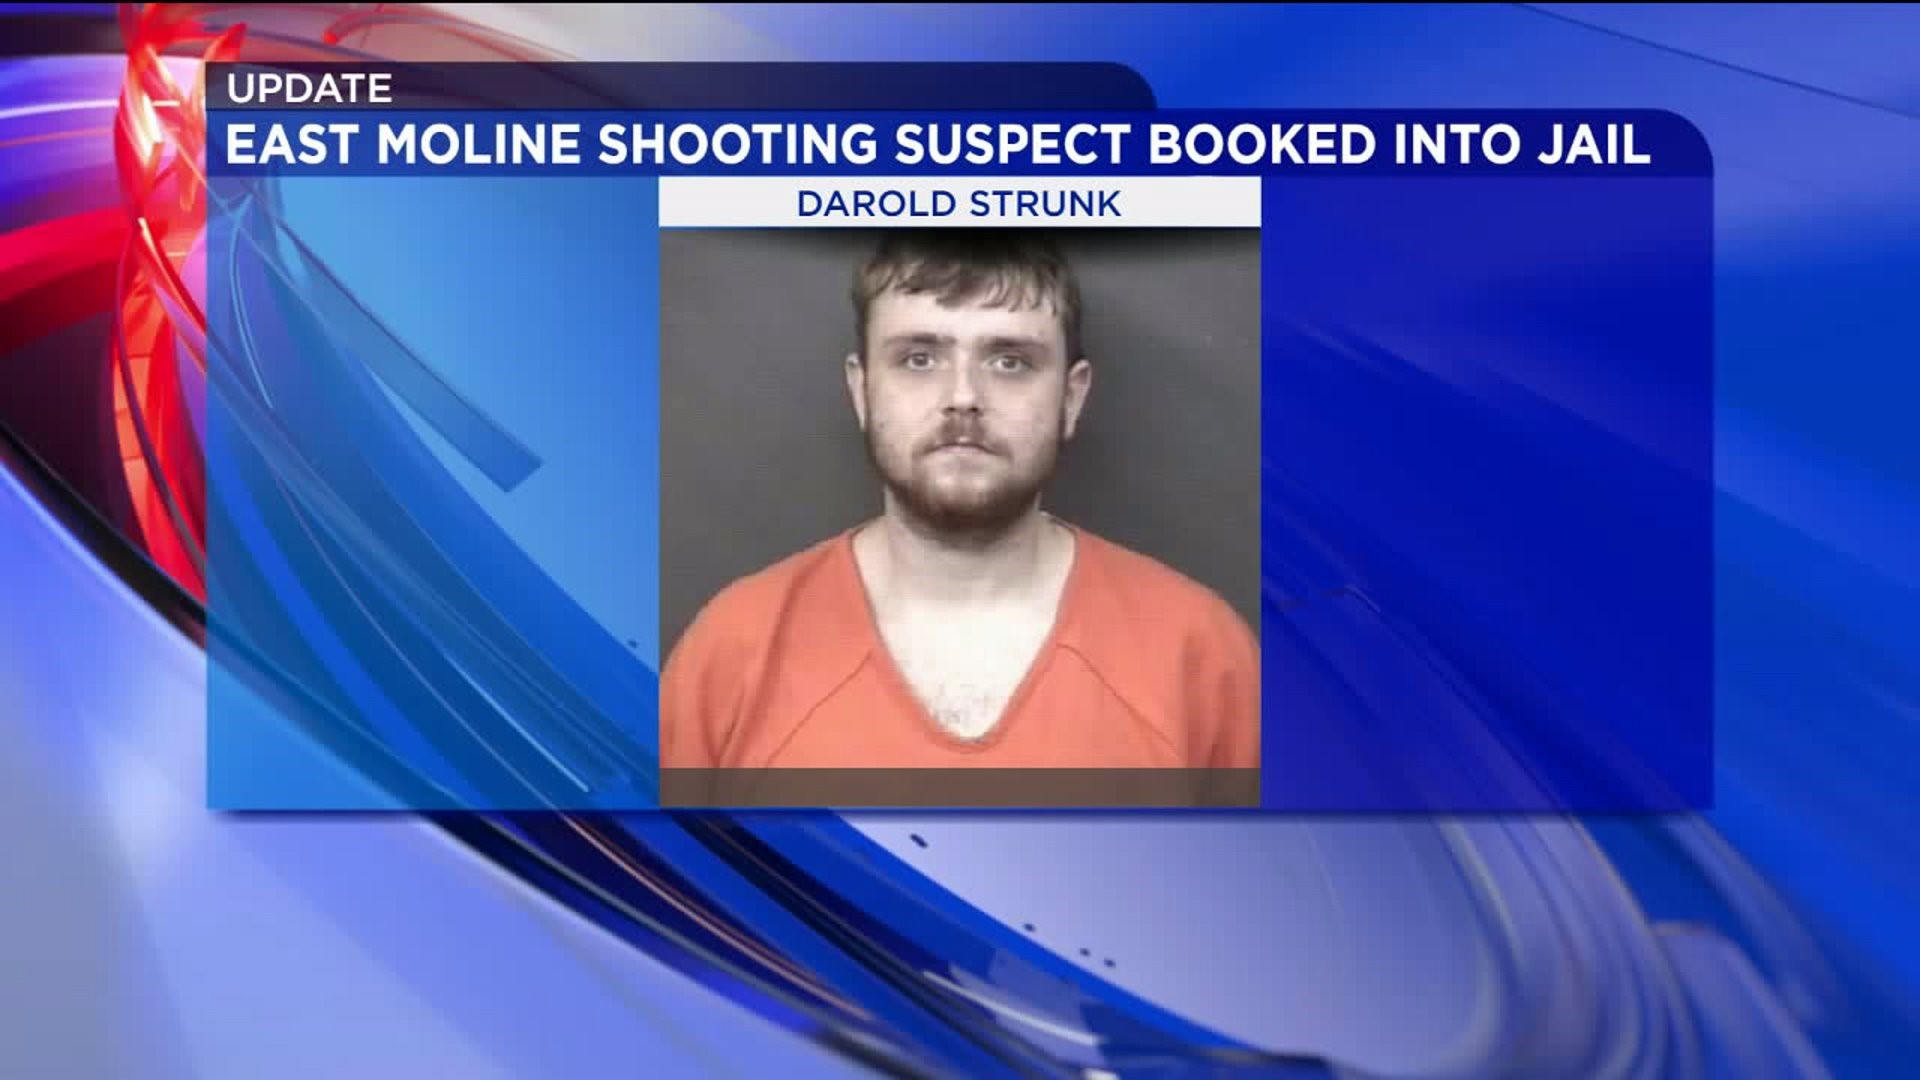 East Moline Shooting Suspect Booked Into Jail